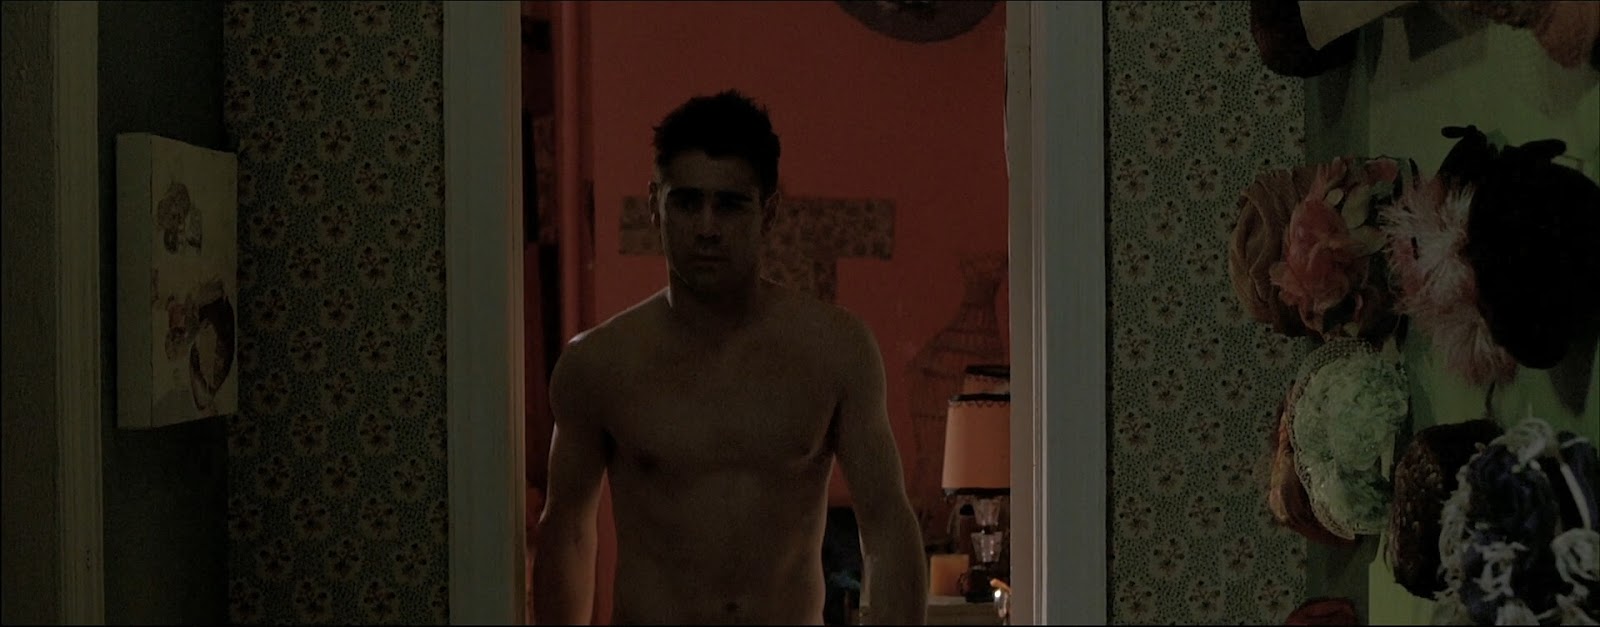 Colin Farrell in A Home at the End of the World.